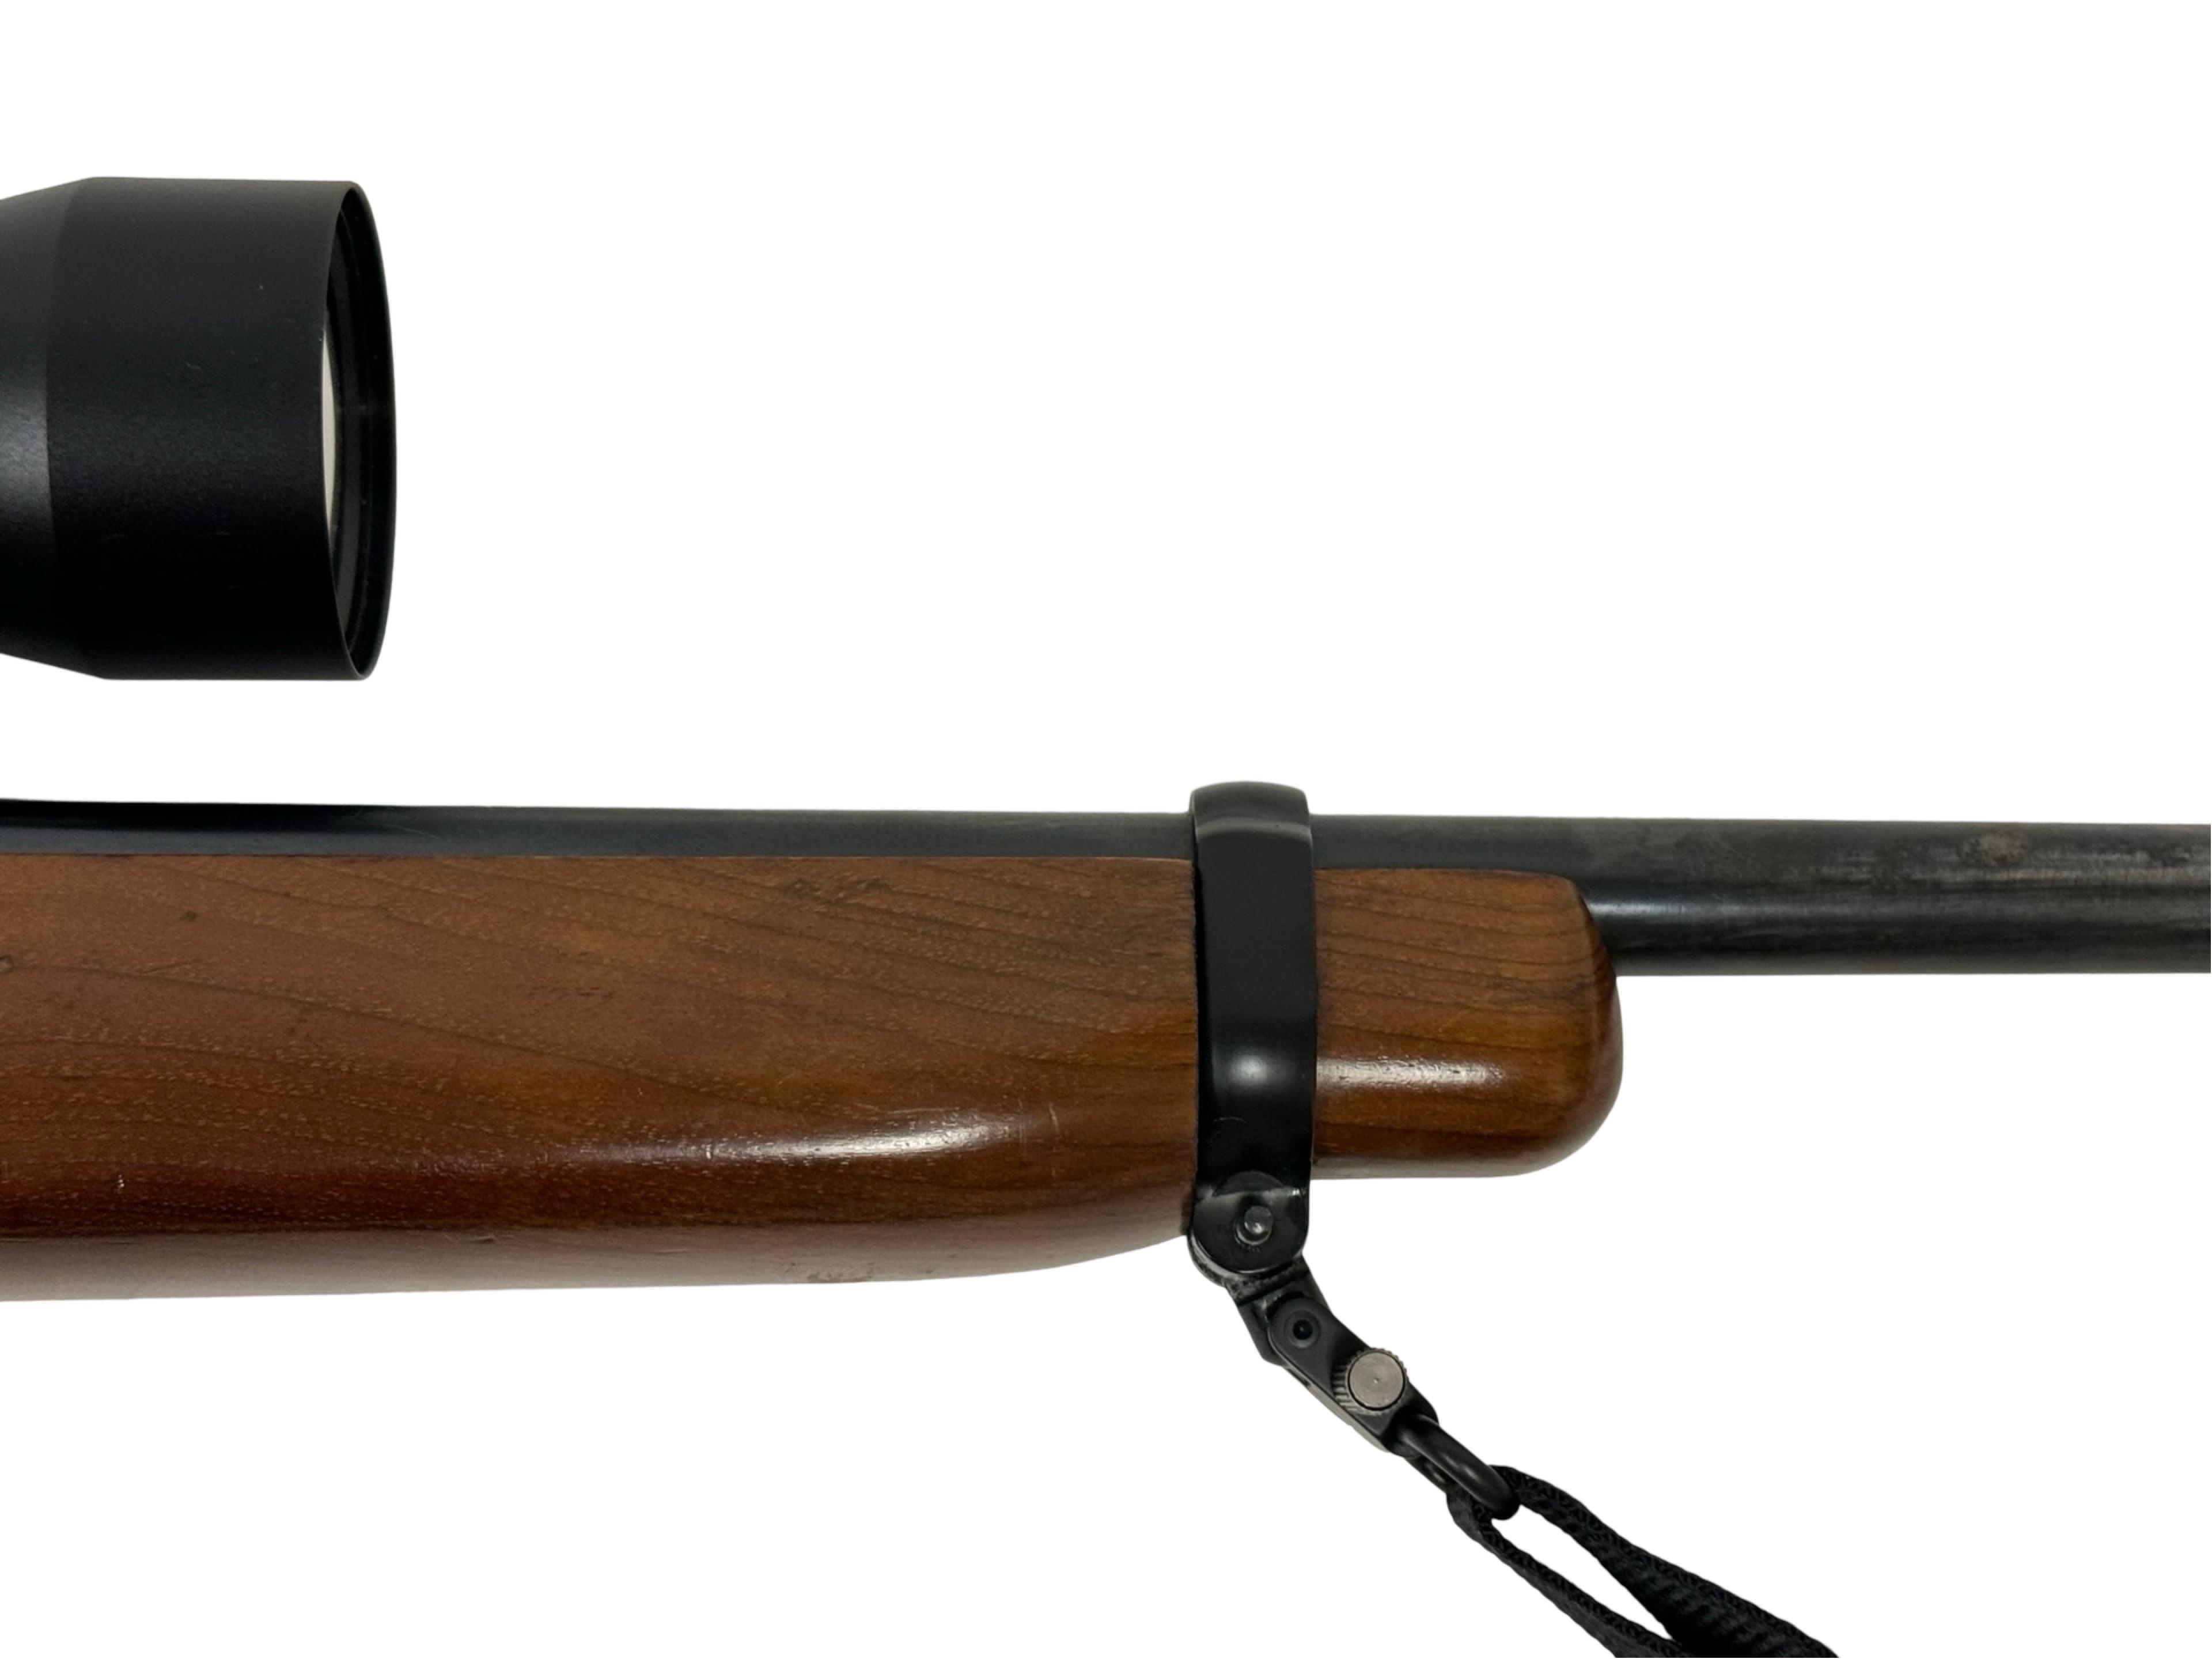 Excellent 1979 Ruger Carbine .44 MAGNUM Semi-Automatic Rifle with Scope and Sling